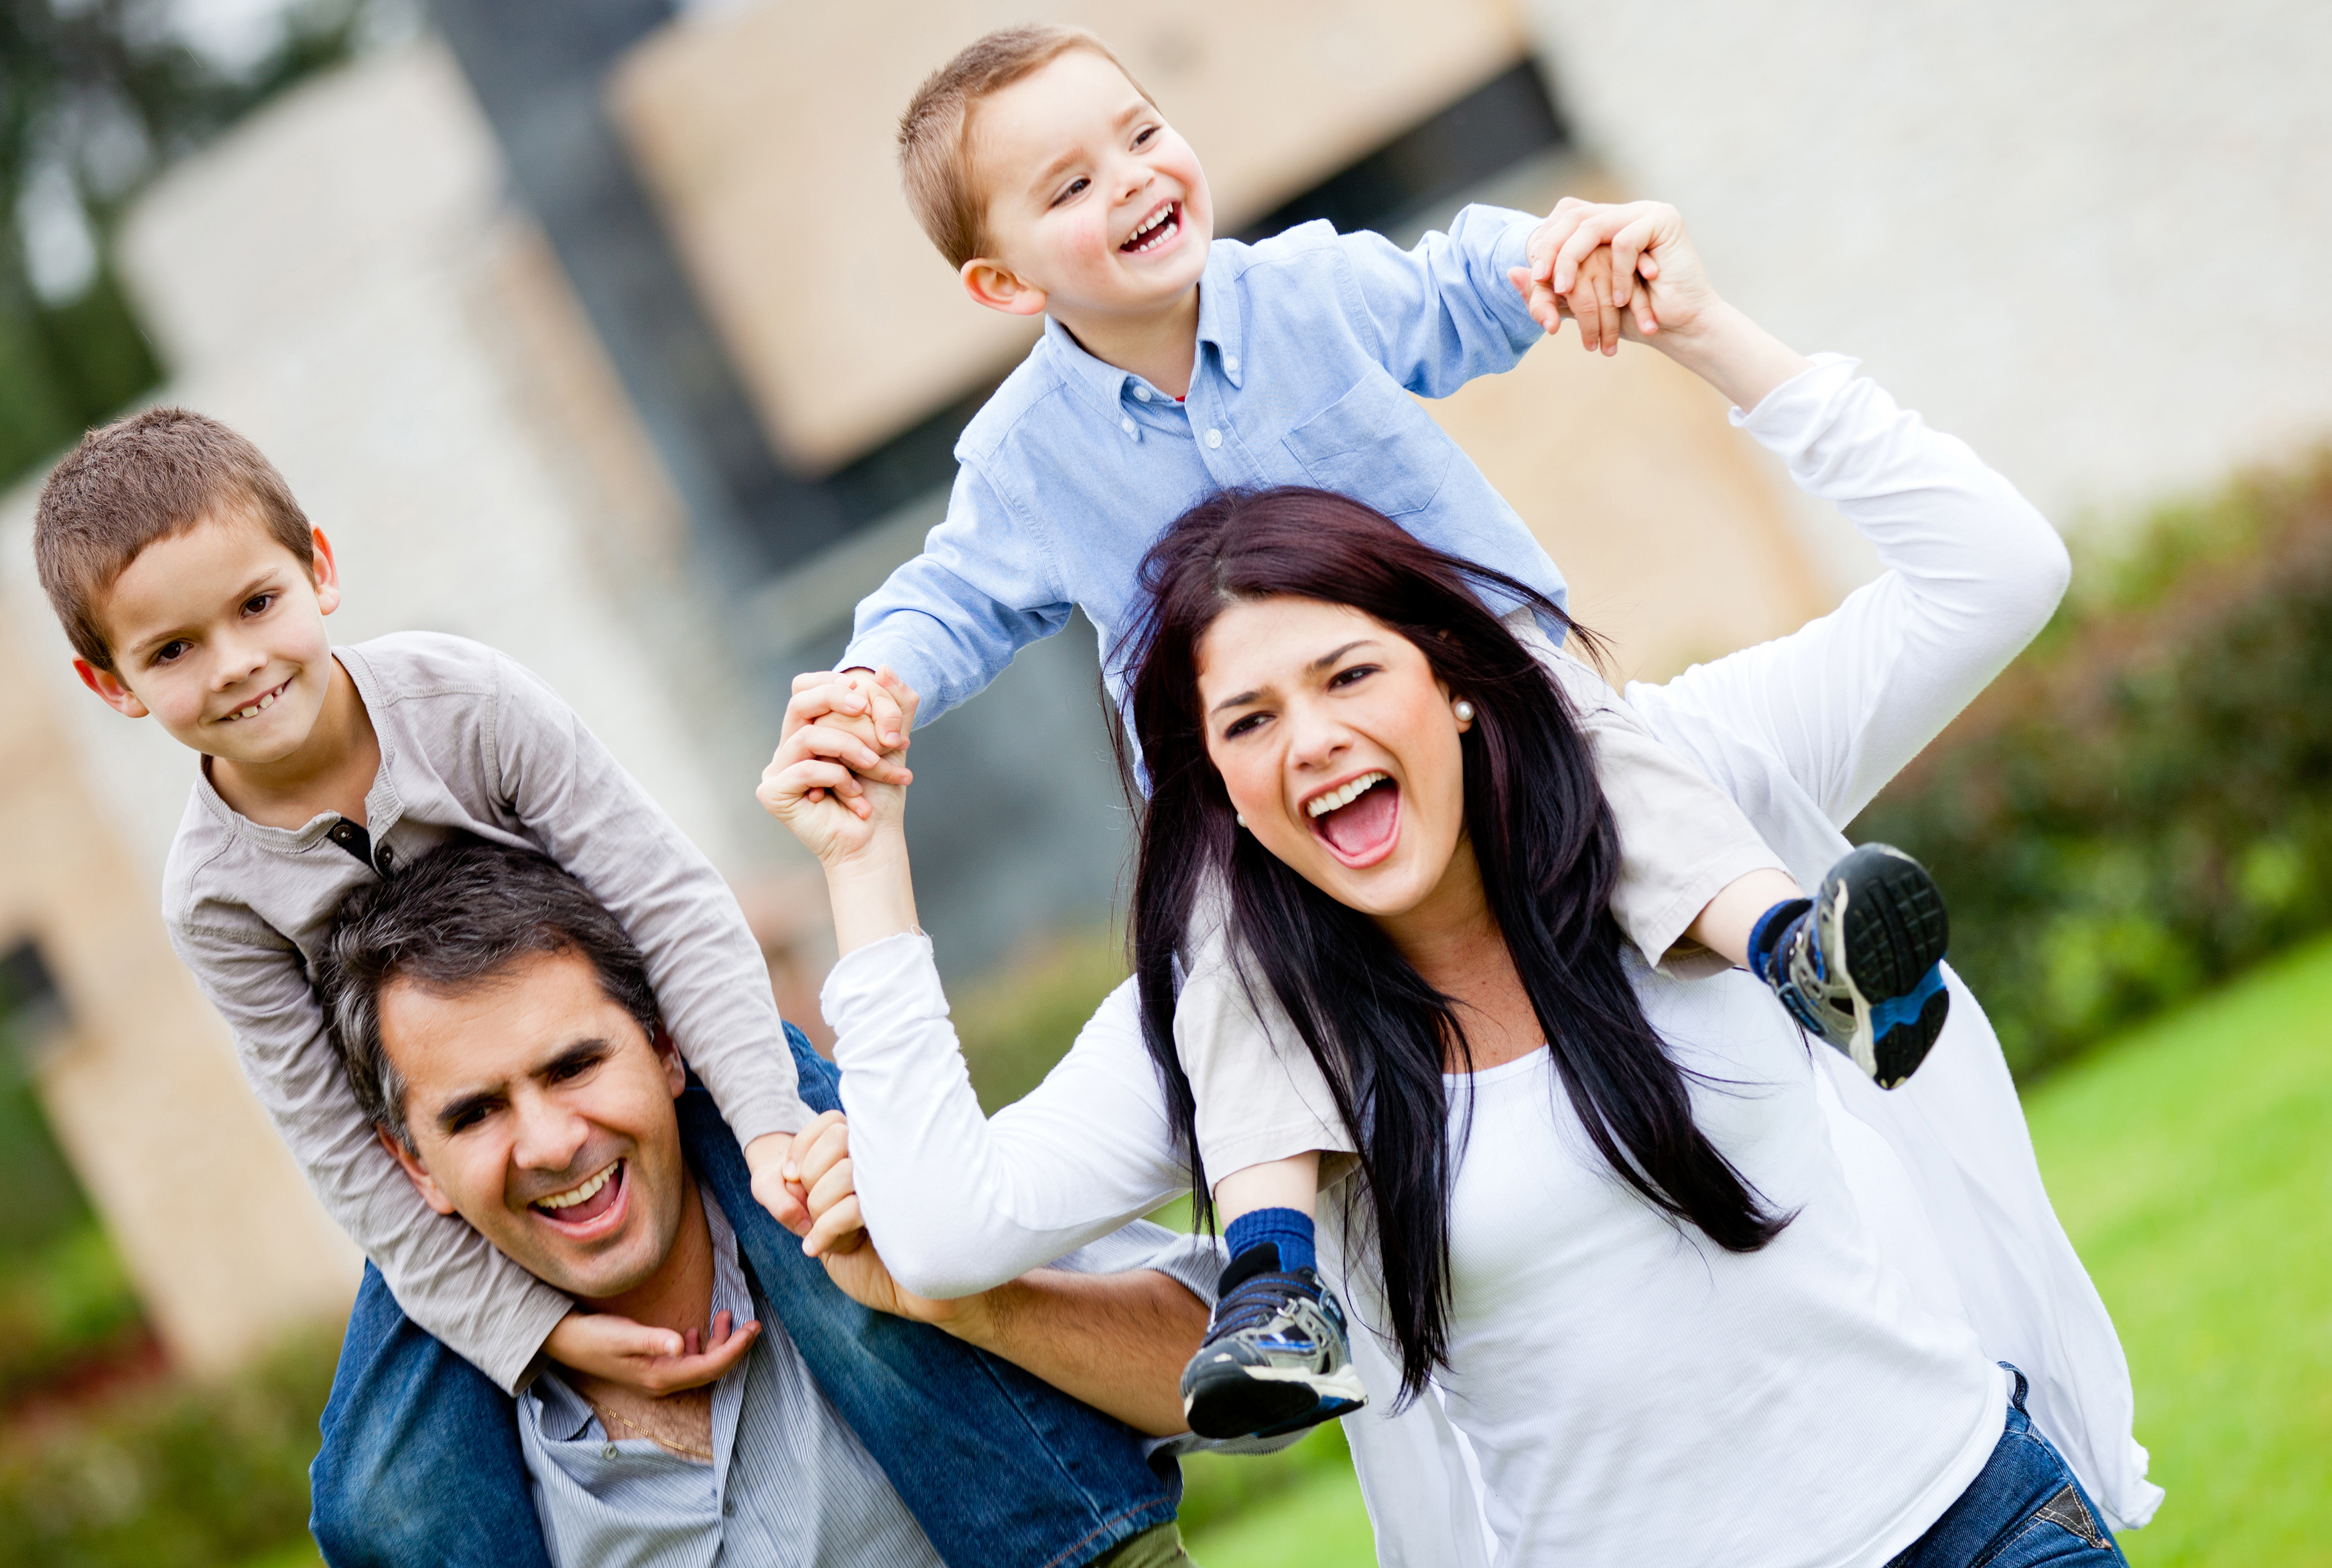 Parenting Styles - 6 Solutions To Develop Better Parenting Skills 2